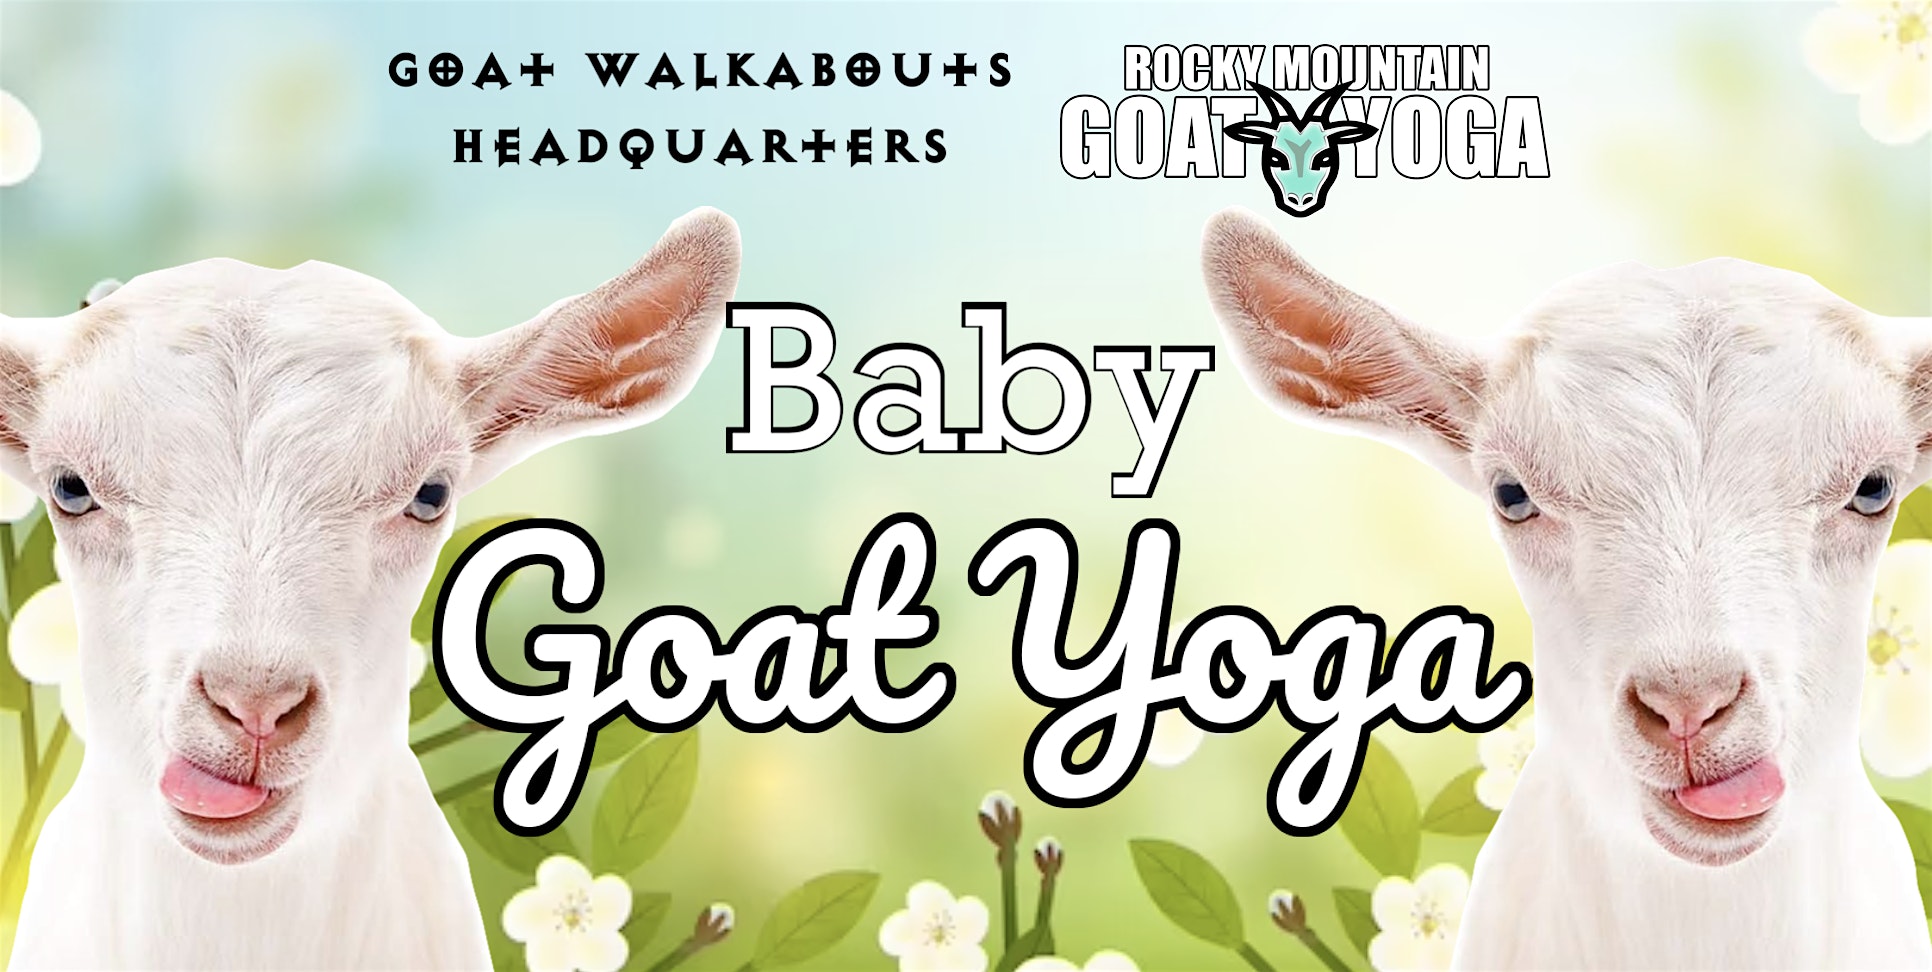 Baby Goat Yoga - July 20th (GOAT WALKABOUTS HEADQUARTERS)